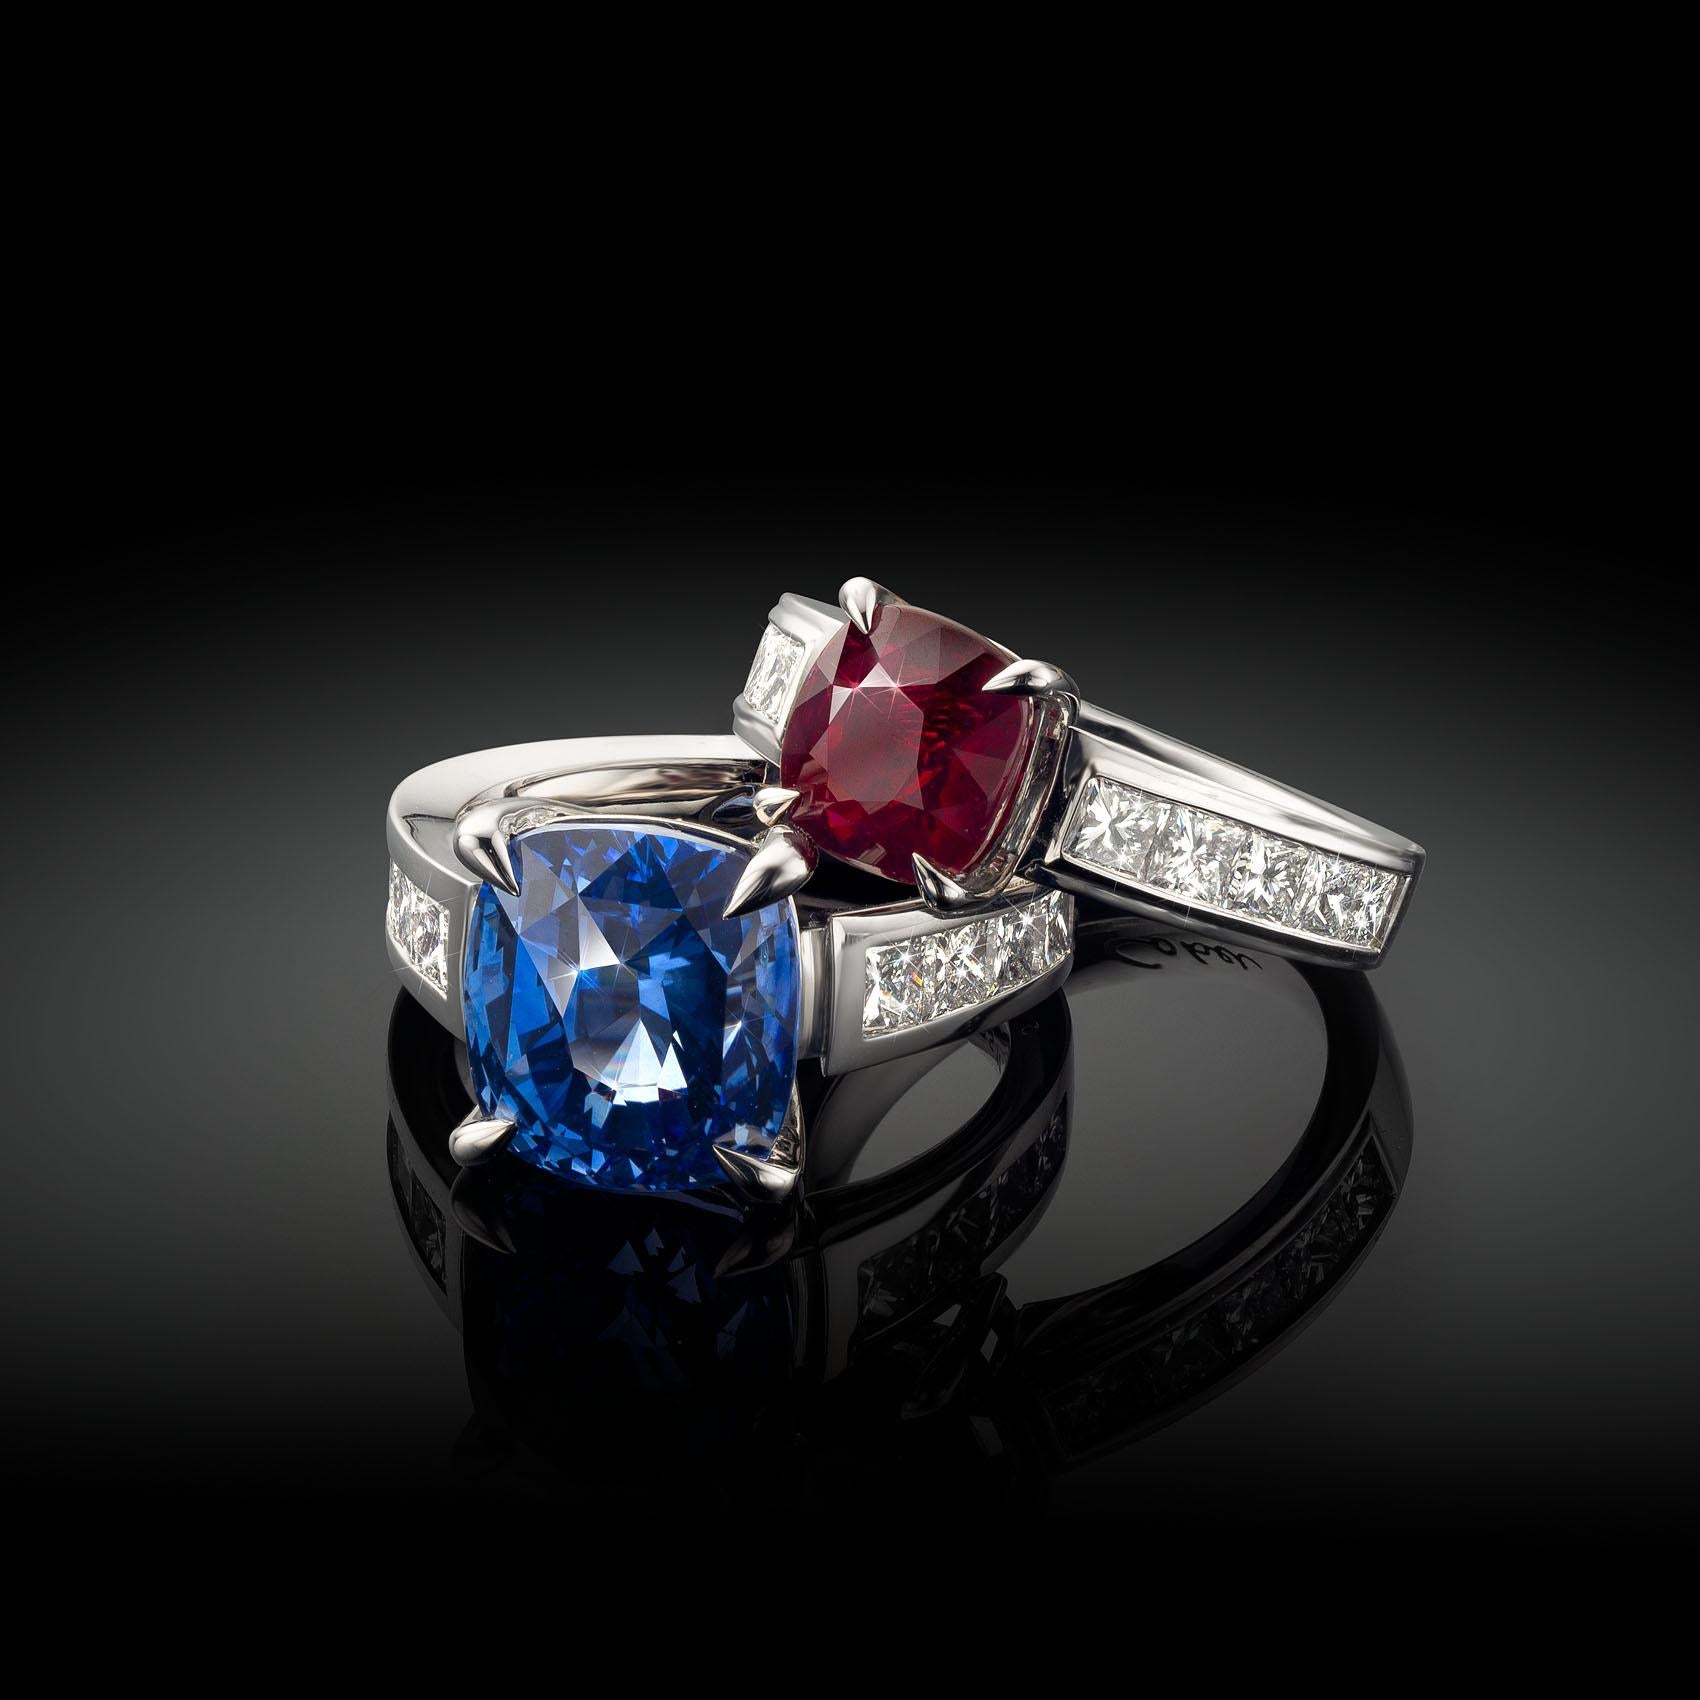 For Sale:  Cober Jewellery with 3.03 Carat Ruby  1.60 Carat total Diamonds White Gold Ring  10